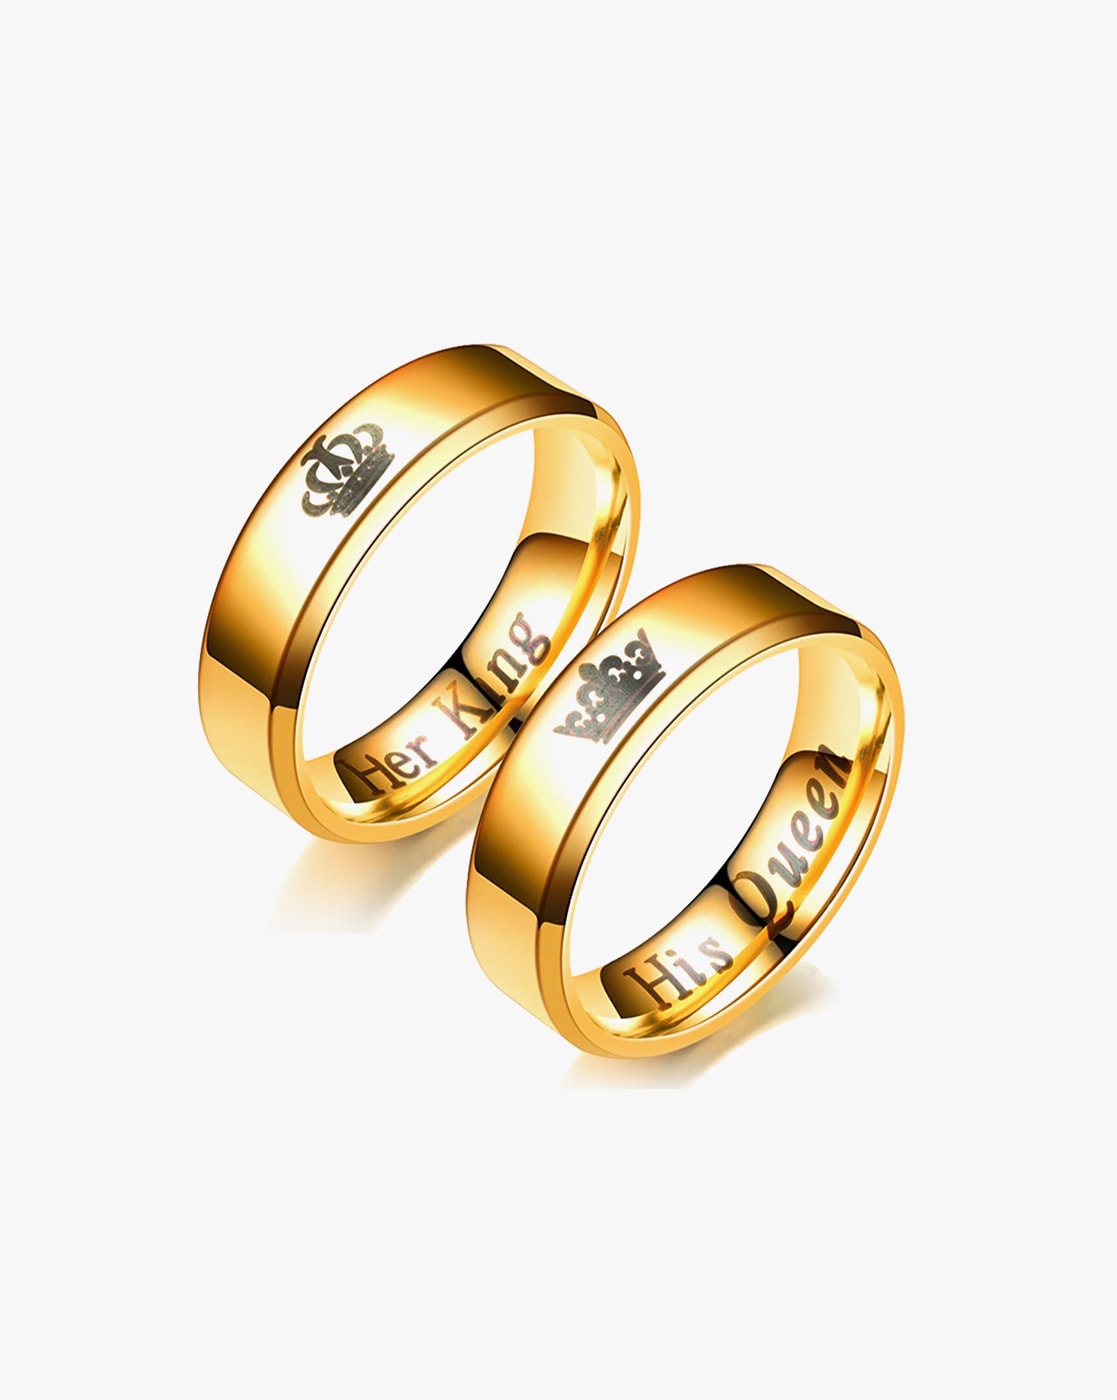 Love Rings Womens Titanium Gold Ring Couple Band Stainless Steel Diamond  Casual Fashion Street Classic Gold Plated Optional Size 5 6mm With From  Luxuryscarf512, $2.21 | DHgate.Com